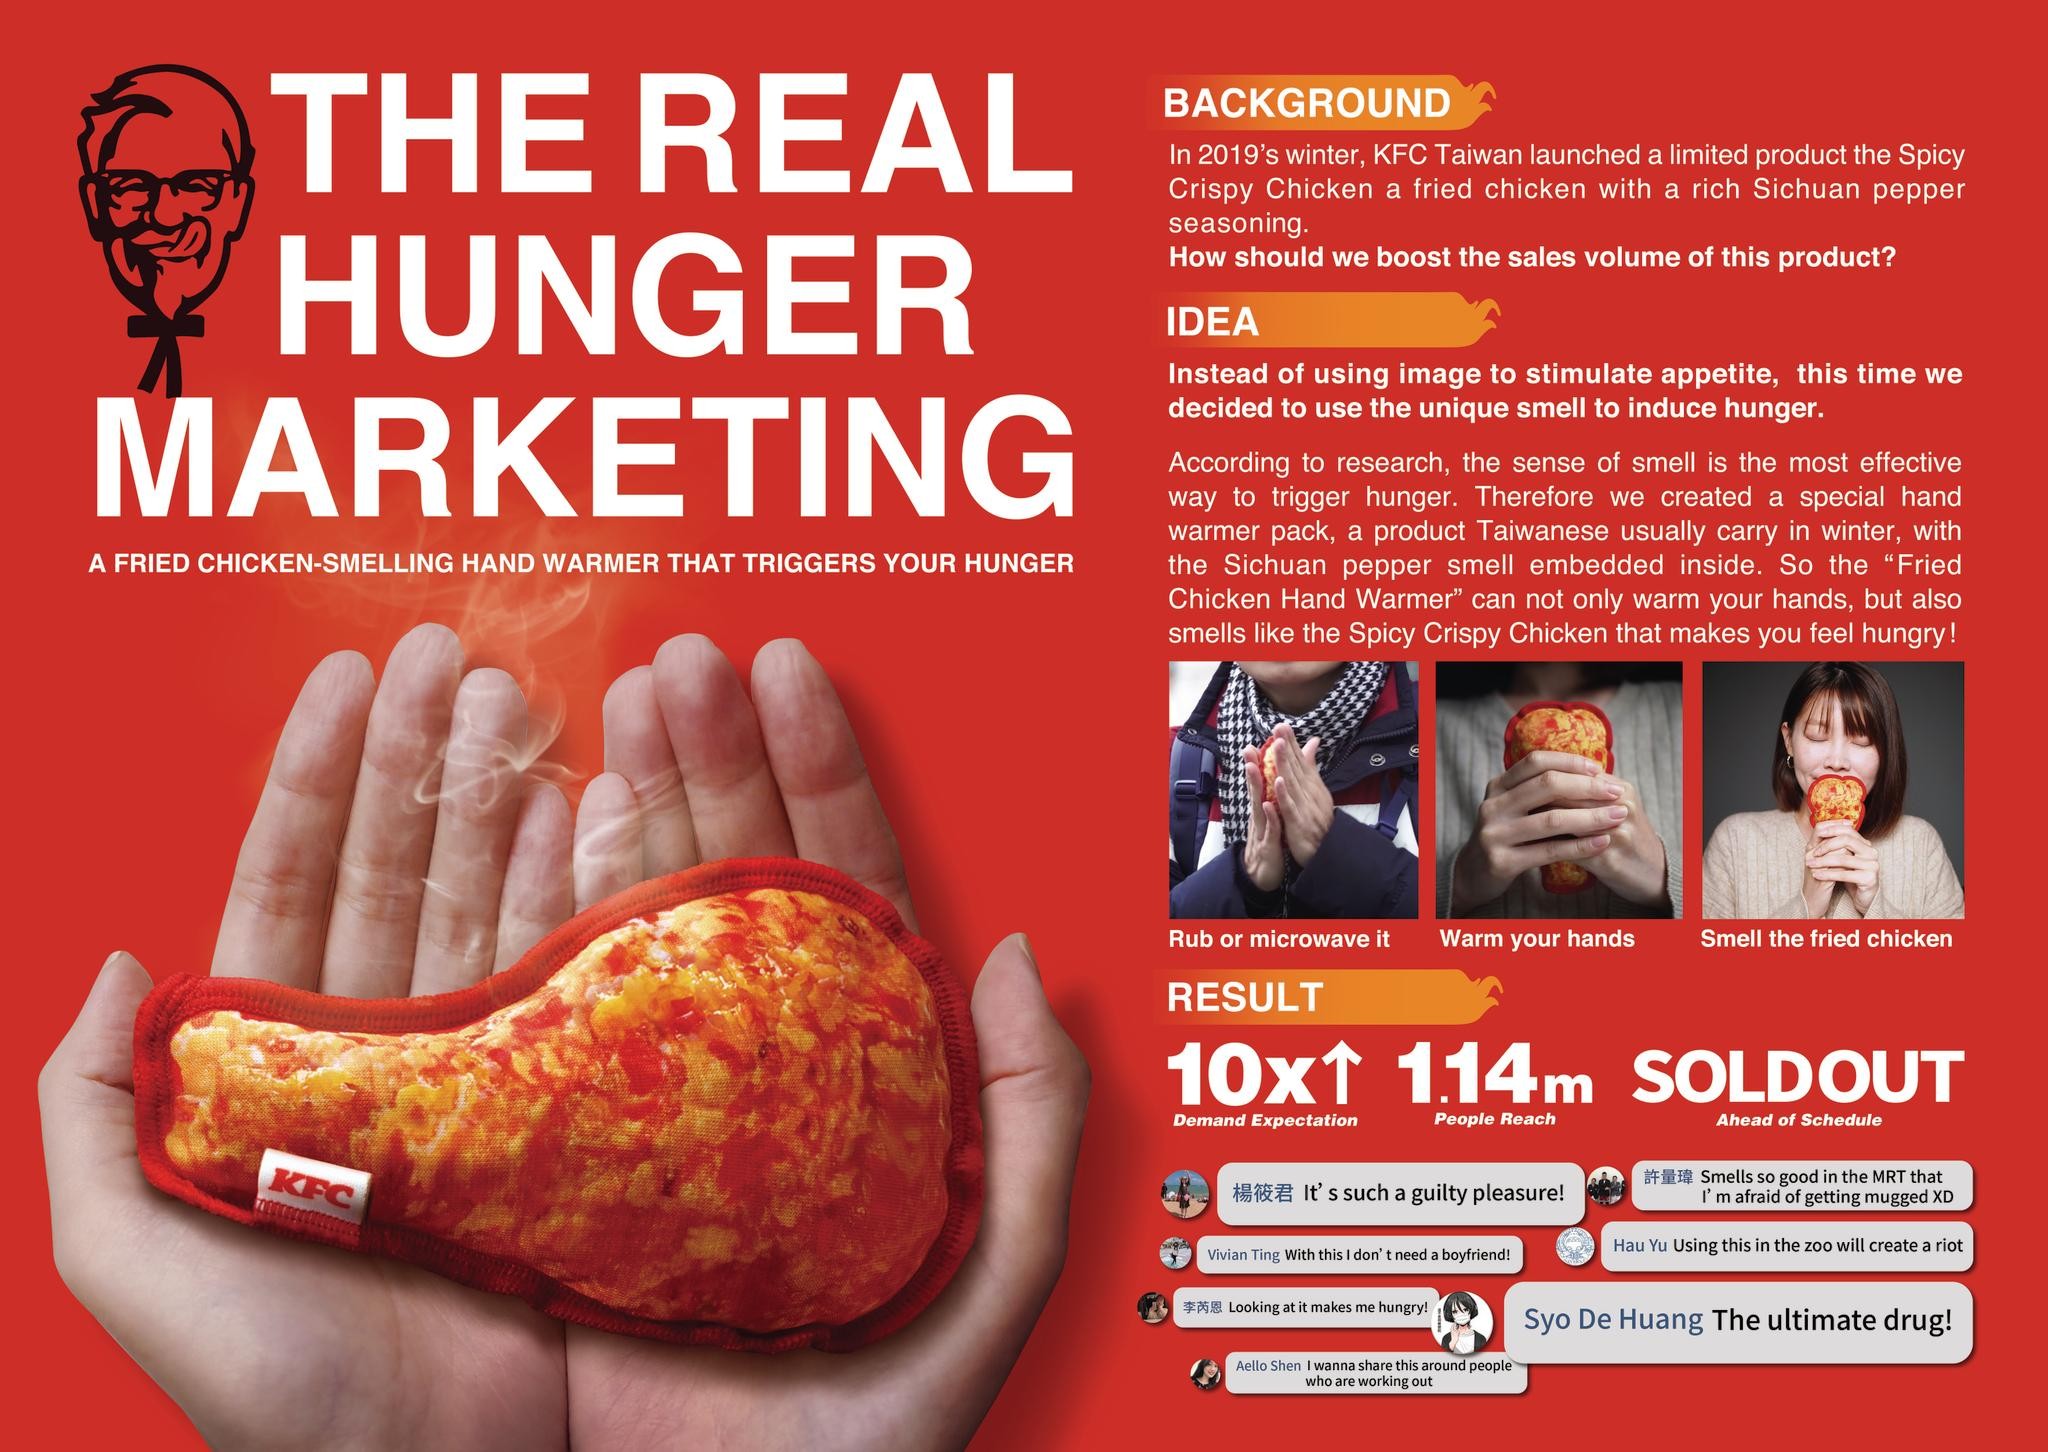 THE REAL HUNGER MARKETING